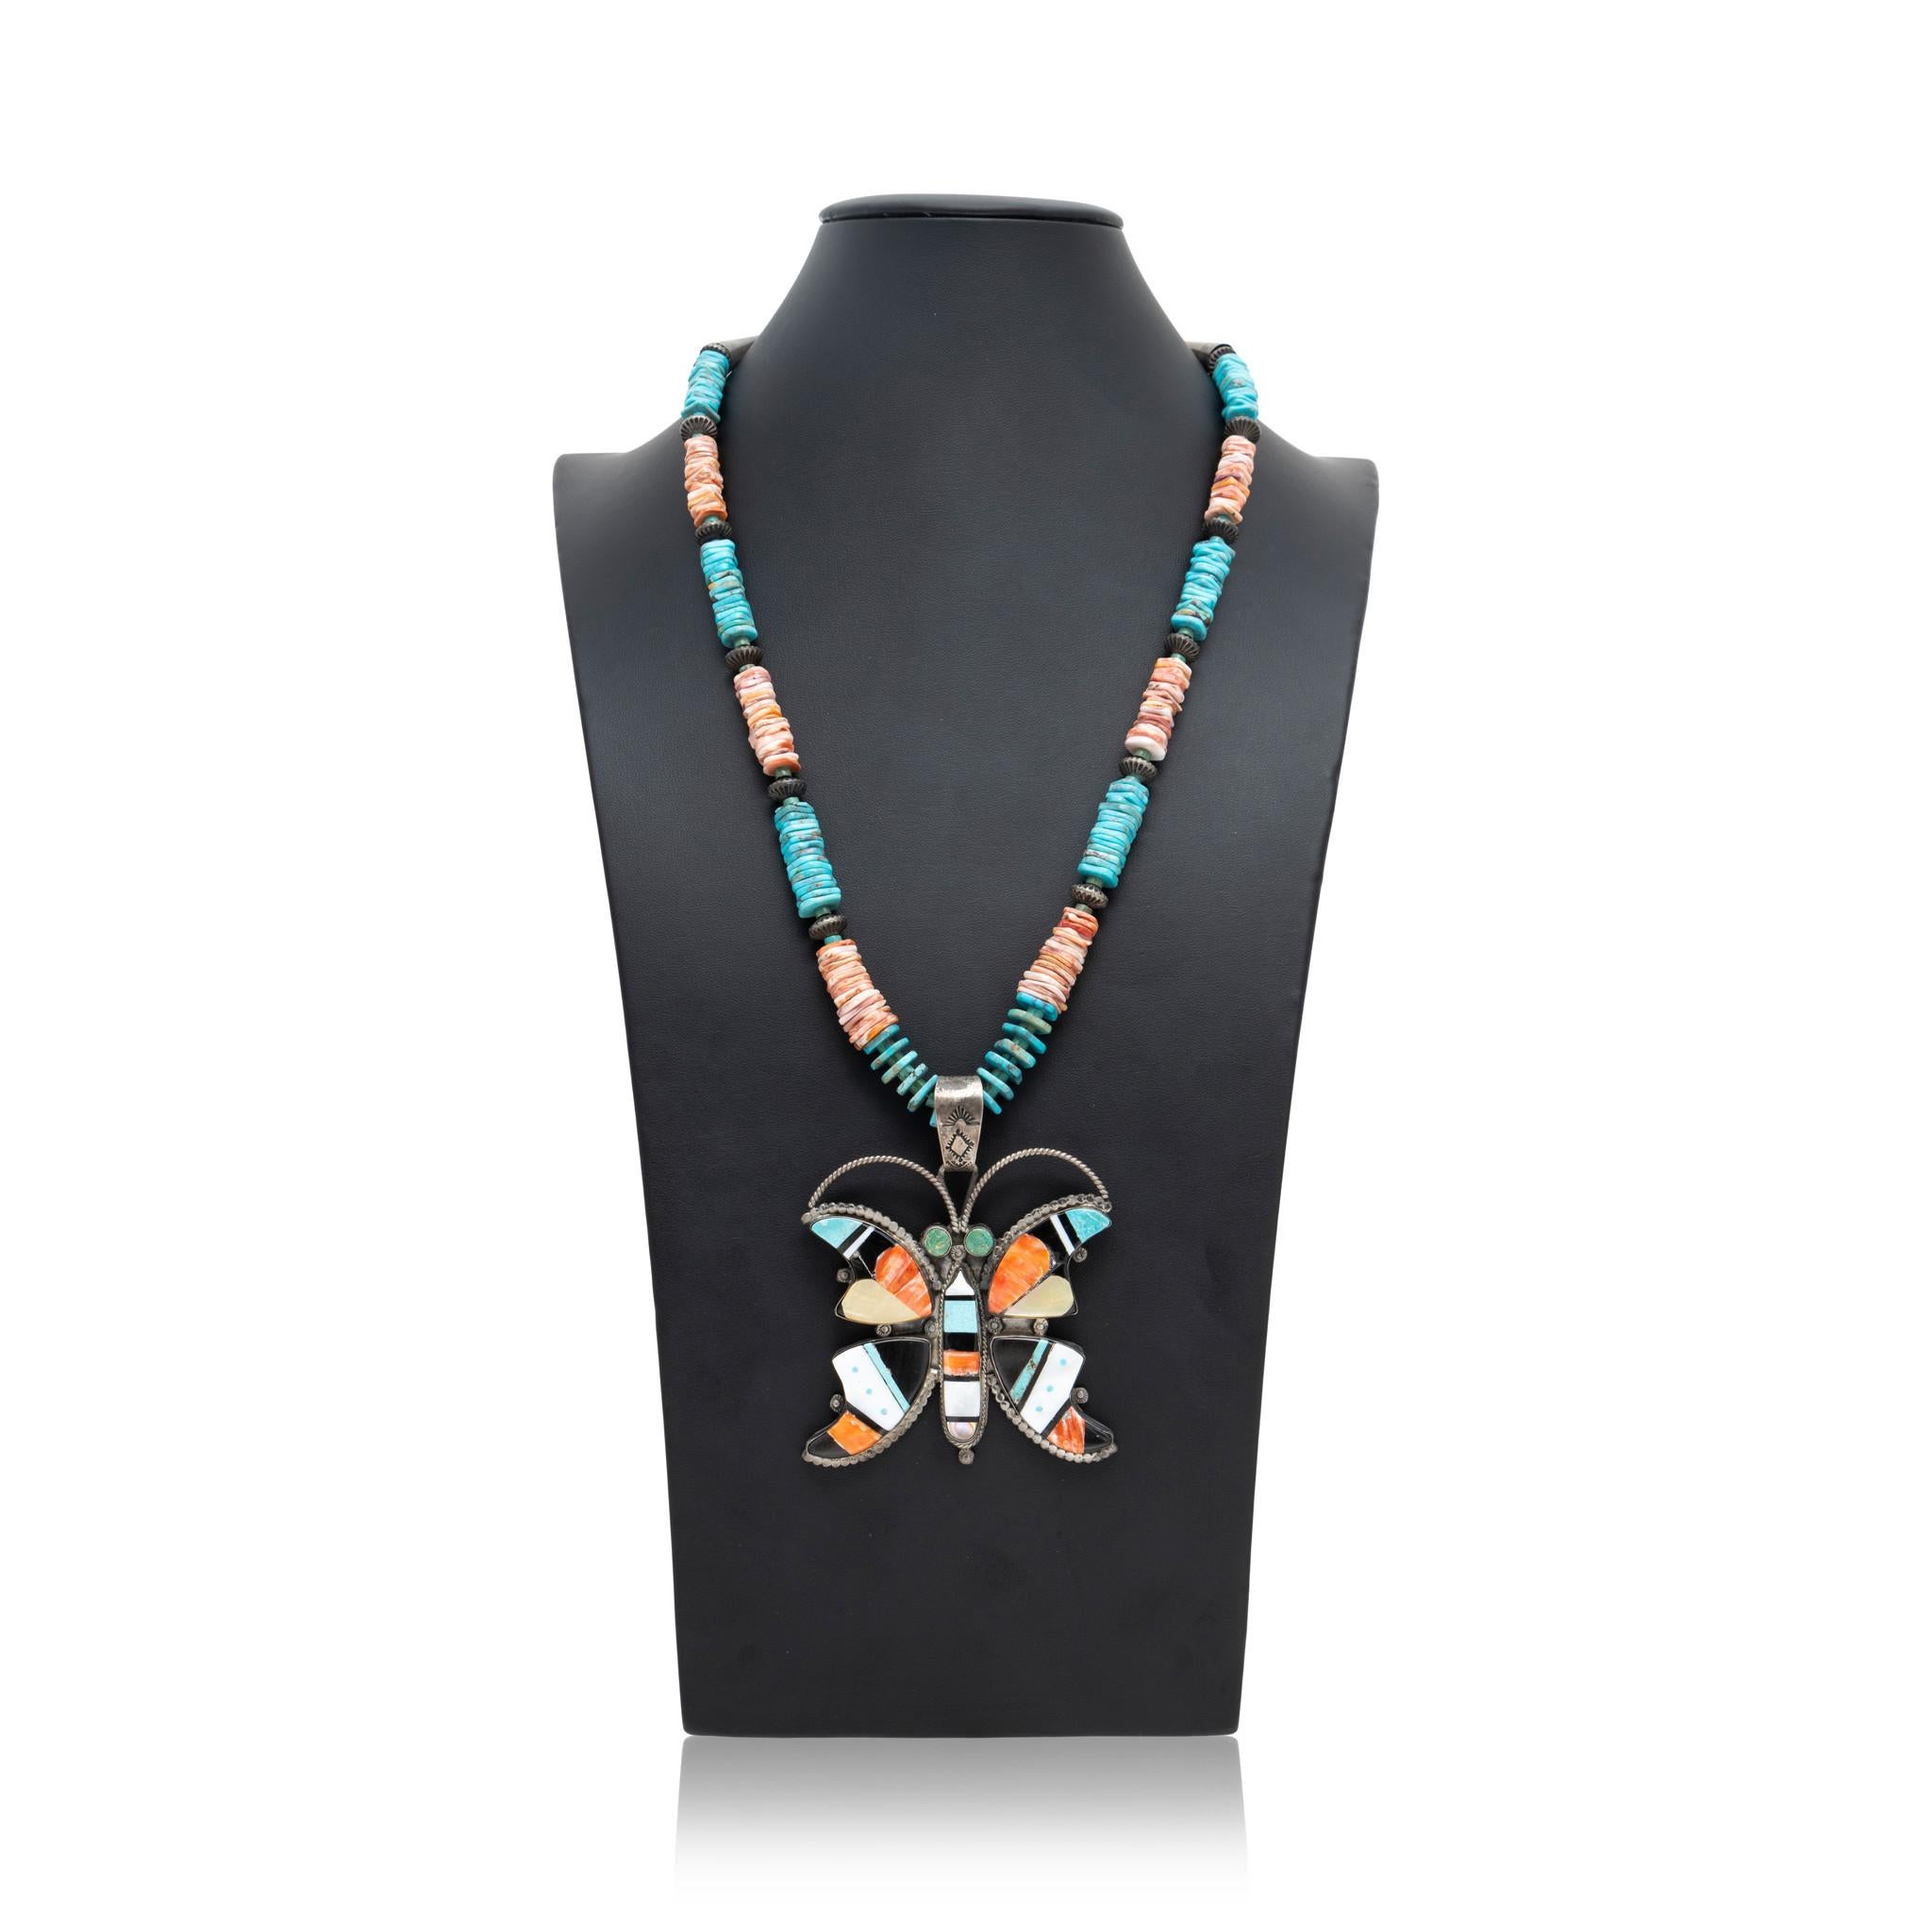 Native American Zuni Indian butterfly pendant Heishi stone necklace. Chain is made of Kingman turquoise, sterling silver and spiny oyster beads with natural cut shape, featuring pendant of a butterfly made of inlaid stones of turquoise, spiny